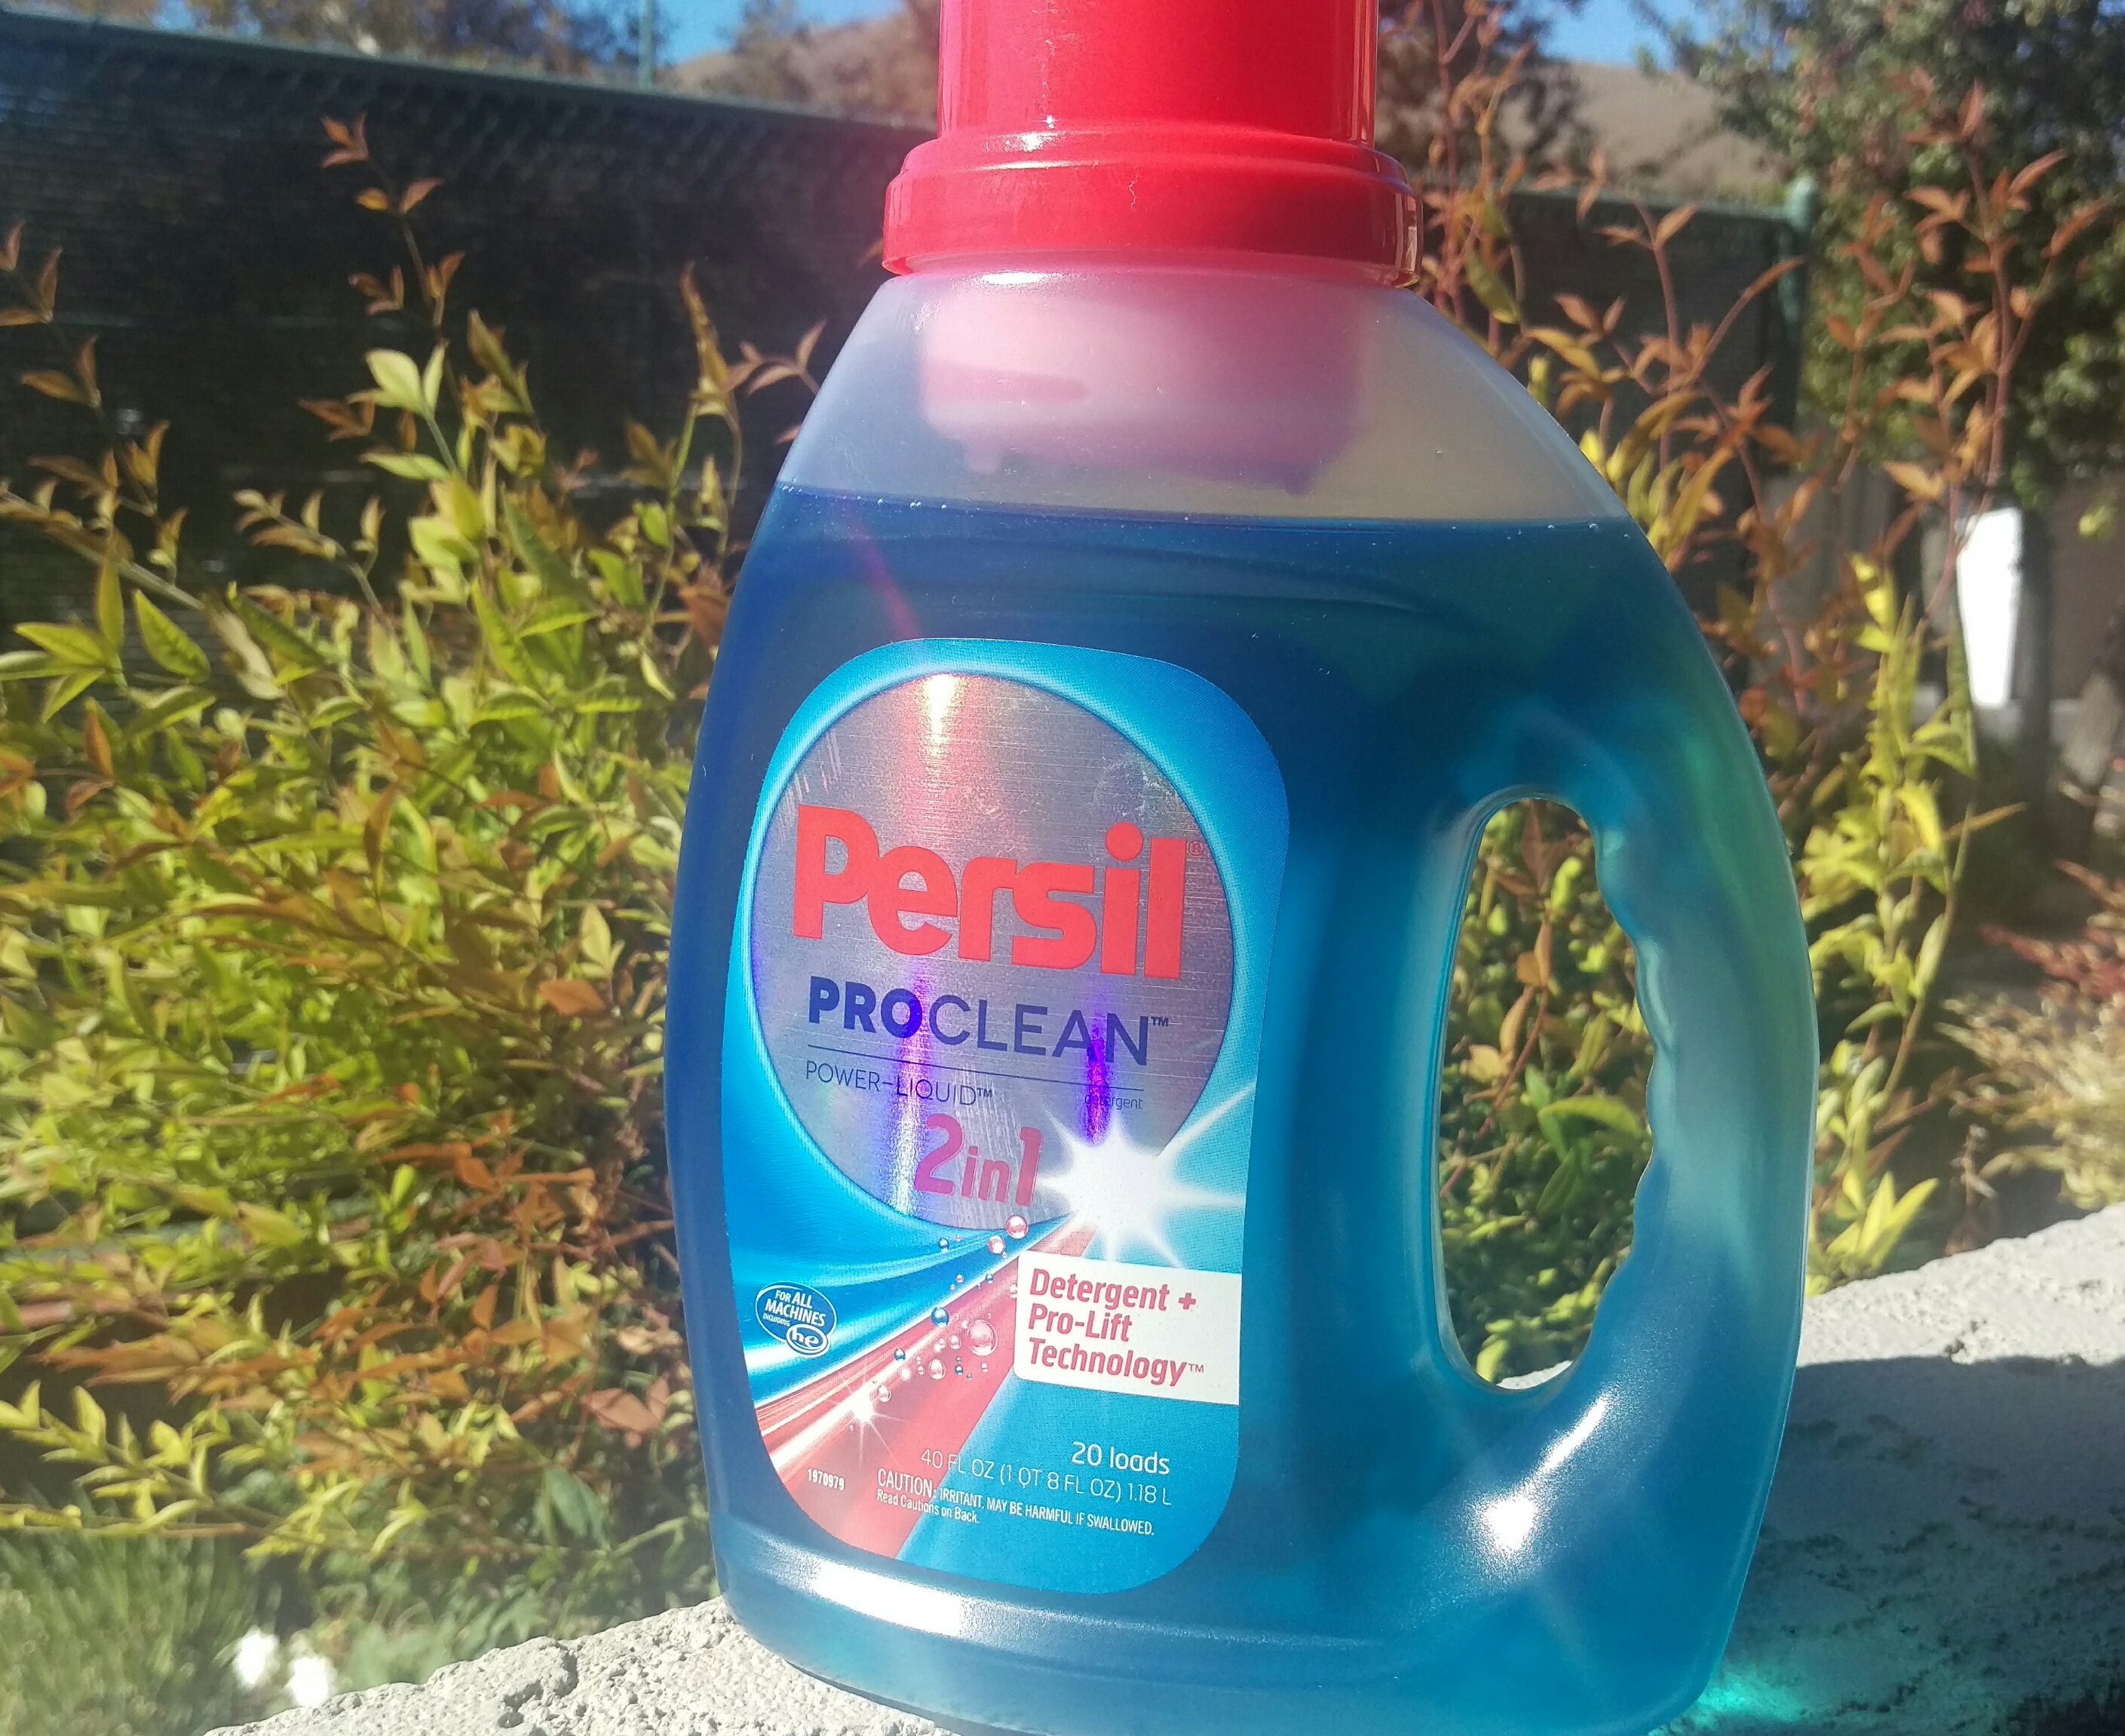 Persil Laundry Detergent Is Now In The US And I Am Loving It!